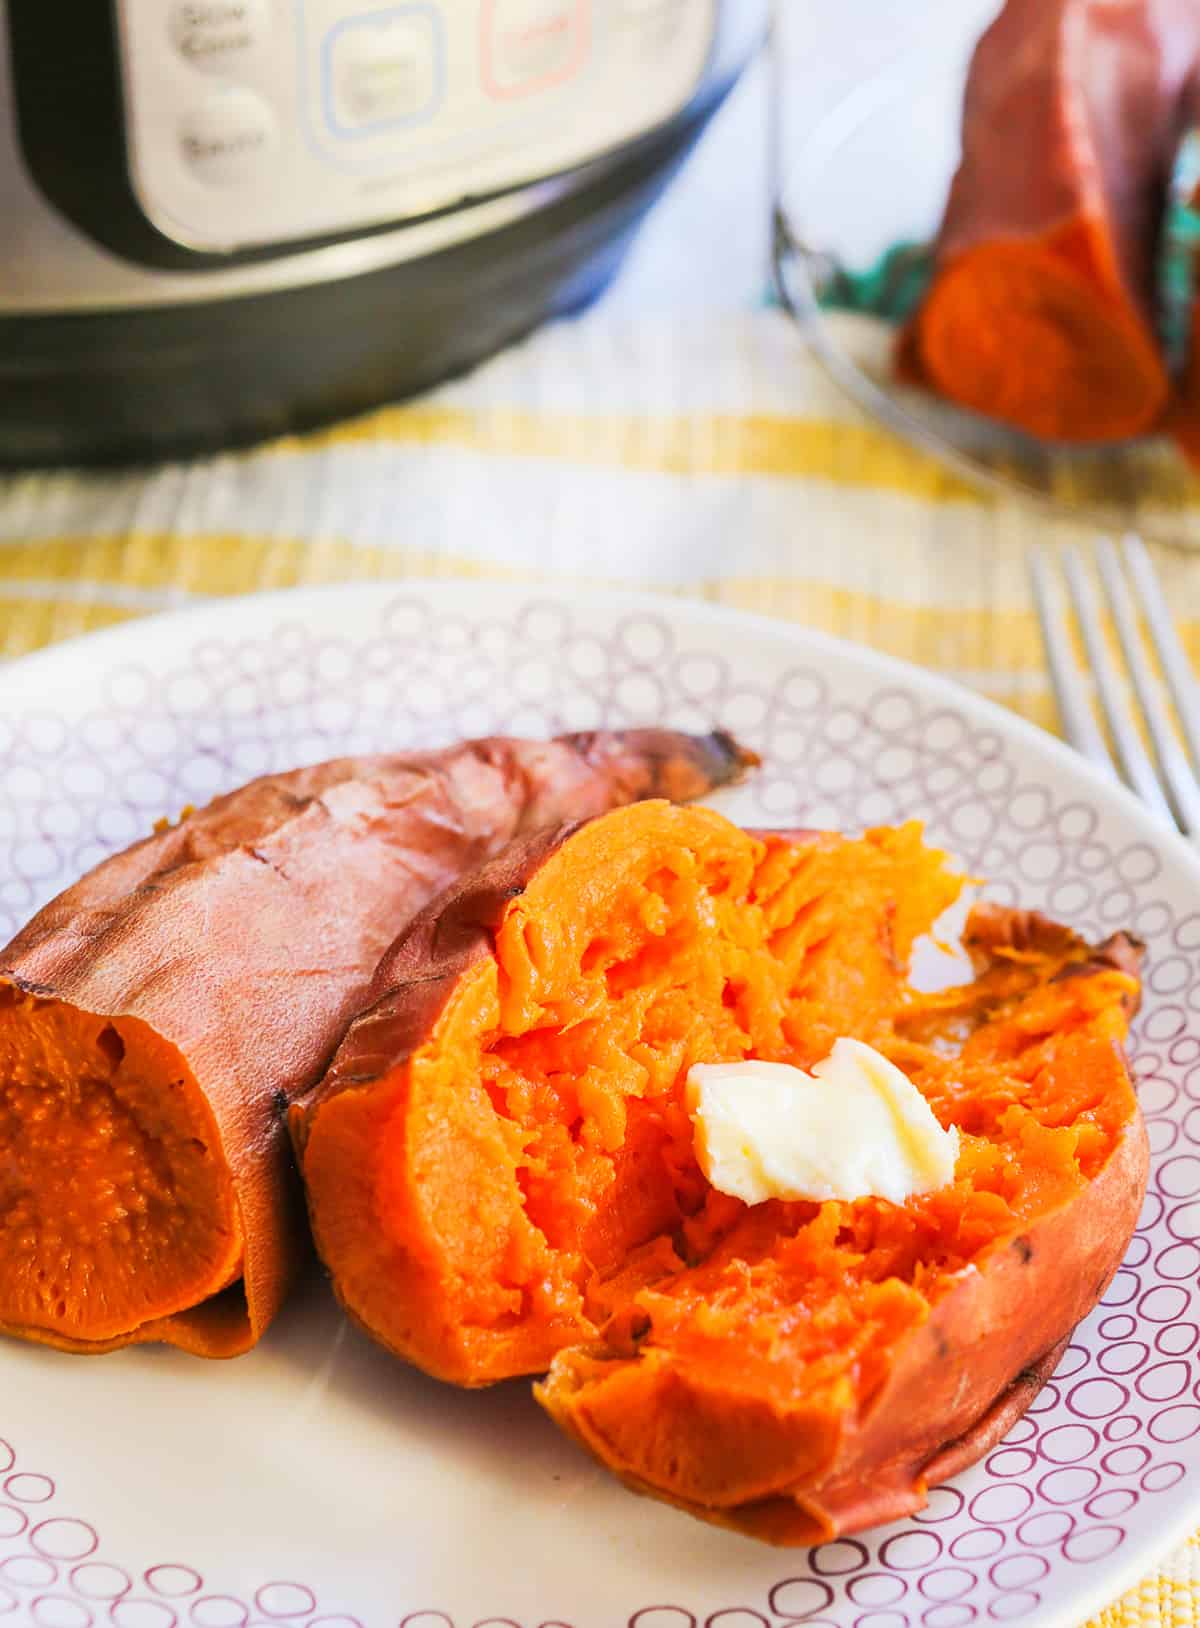 Sweet potatoes on a plate with a pat of butter melting inside.